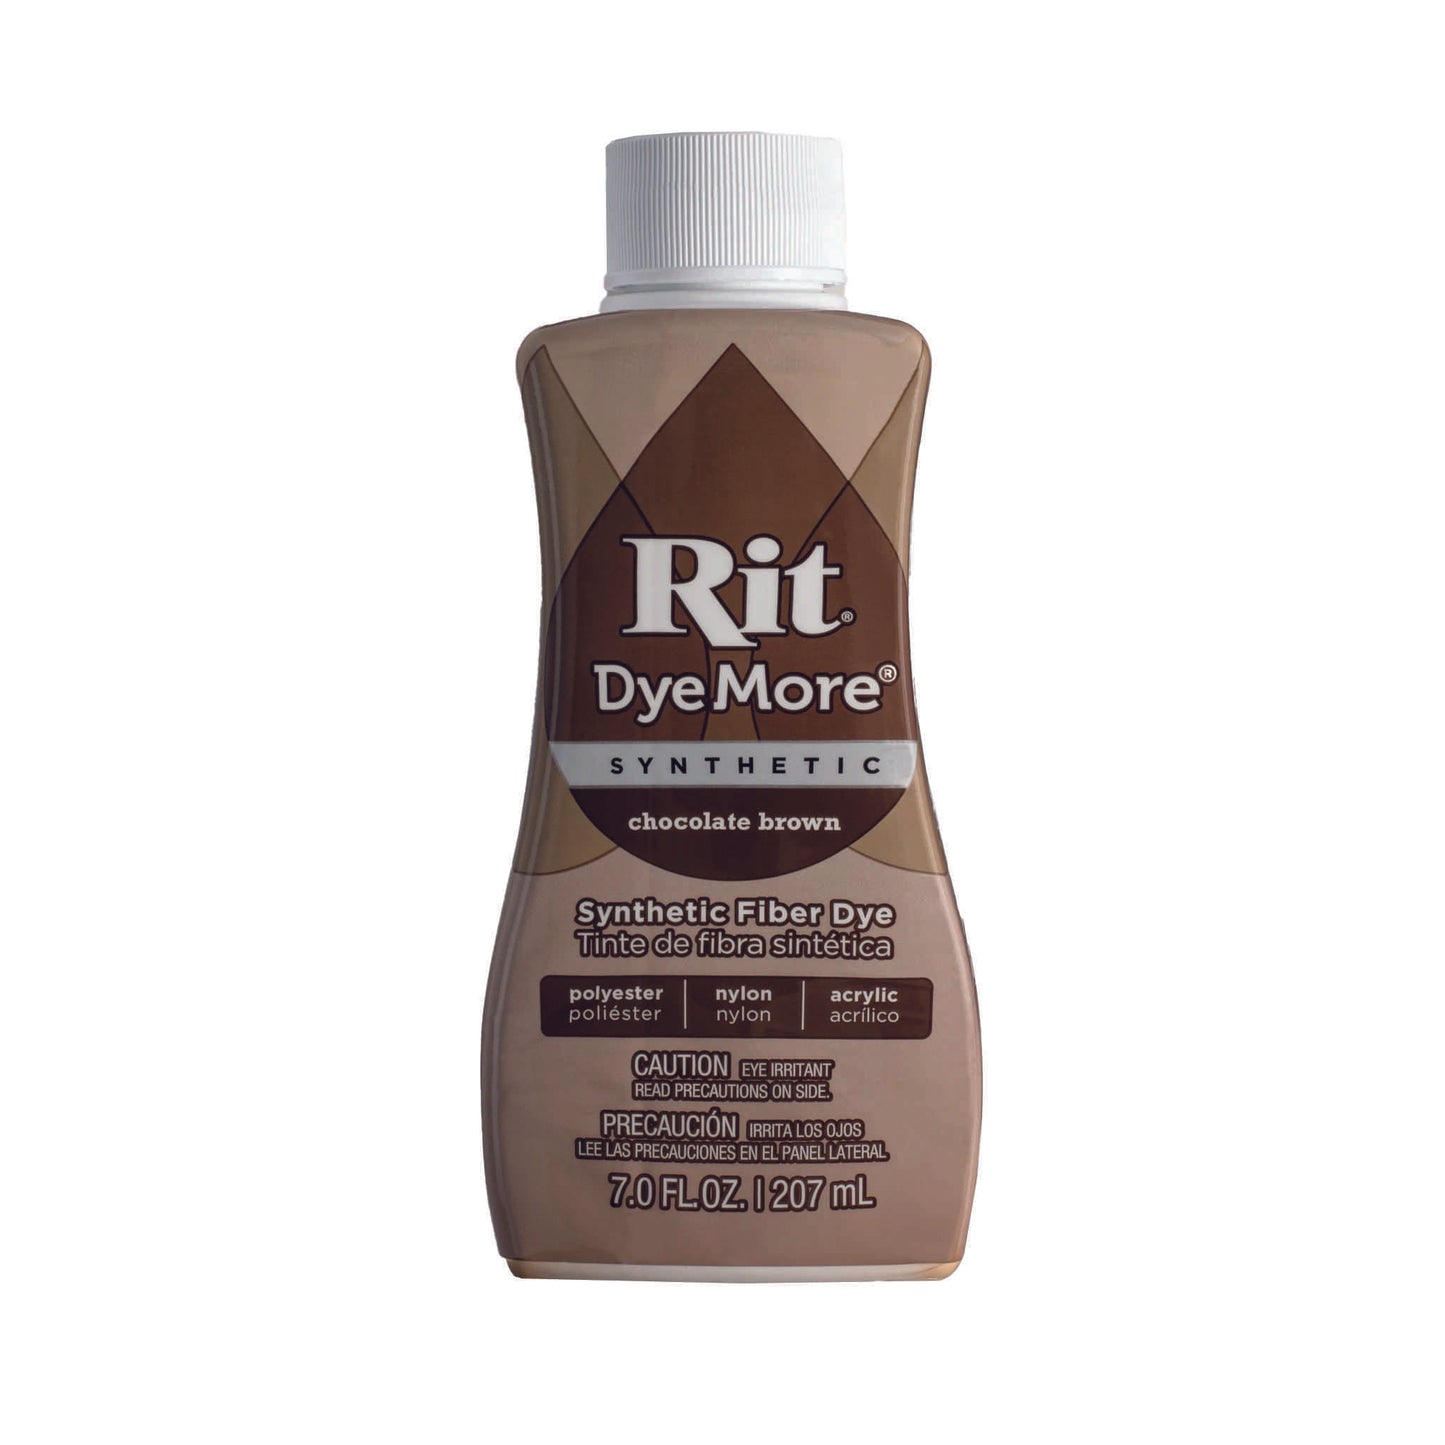 Chocolate brown coloured Rit DyeMore synthetic fibre dye bottle on a white background.